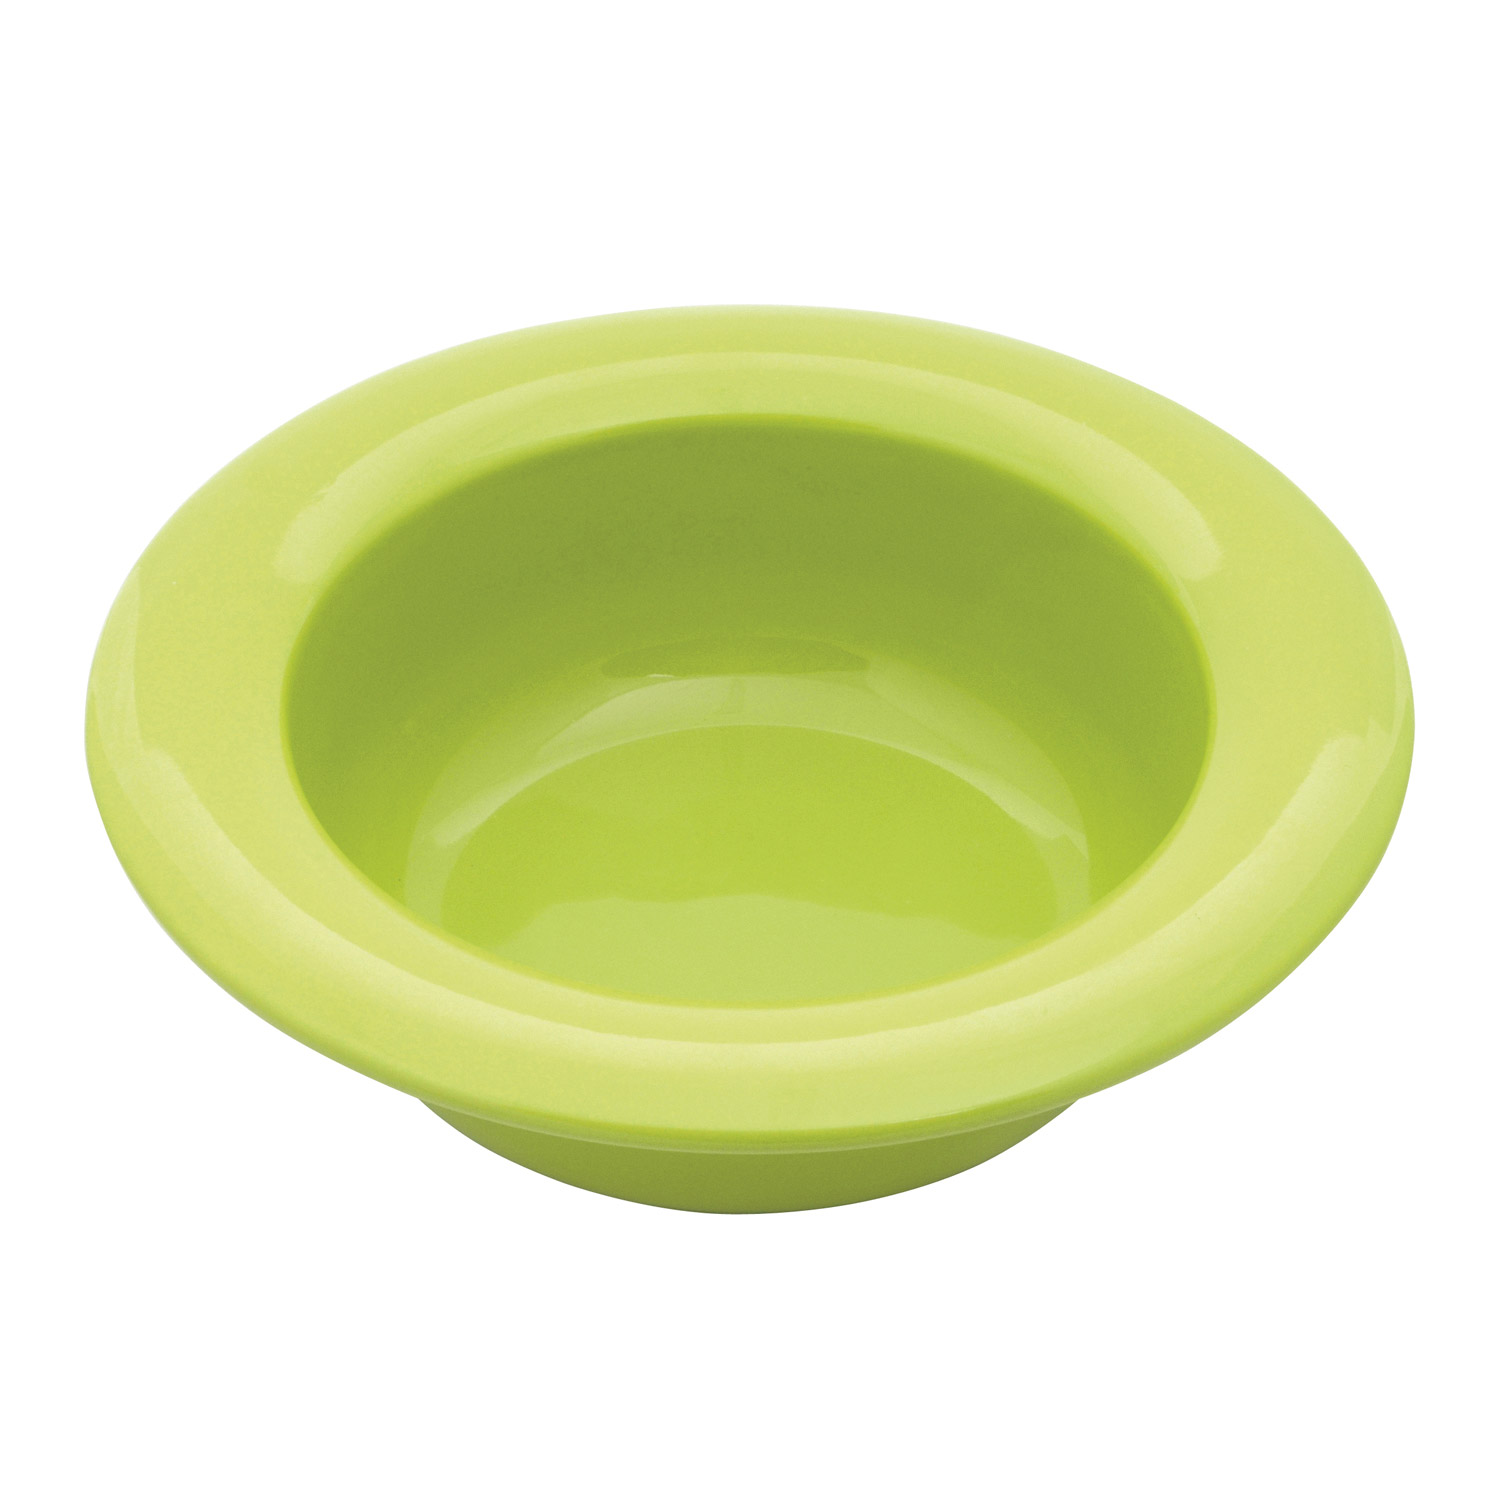 Dignity - Ceramic Soup Cereal Bowl - Green